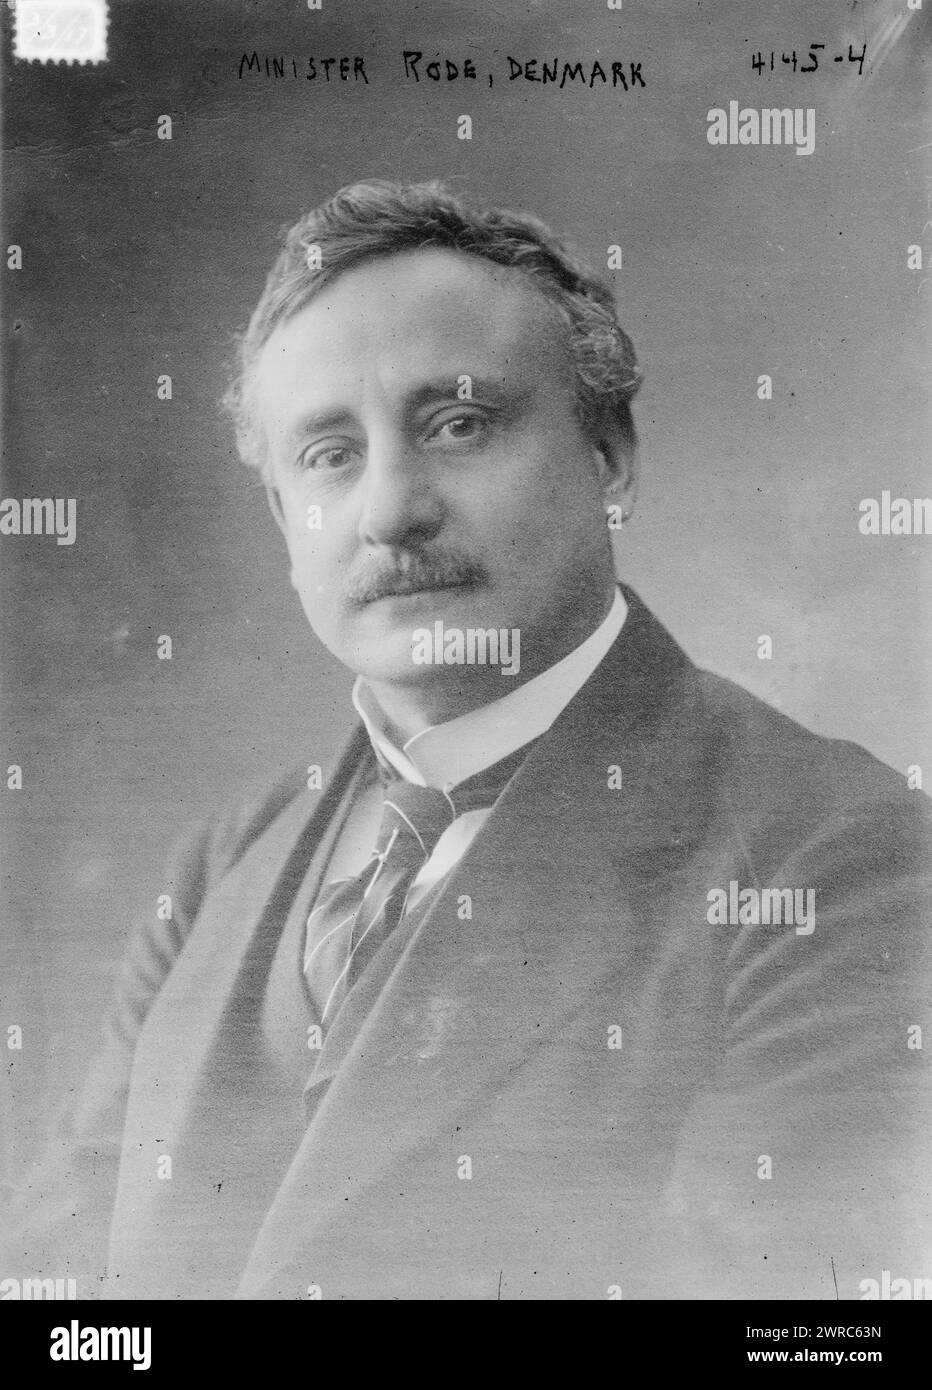 Minister Rode, Denmark, Photograph shows Danish politician and newspaper editor Ove Rode (1867-1933)., 1917 March 3, Glass negatives, 1 negative: glass Stock Photo